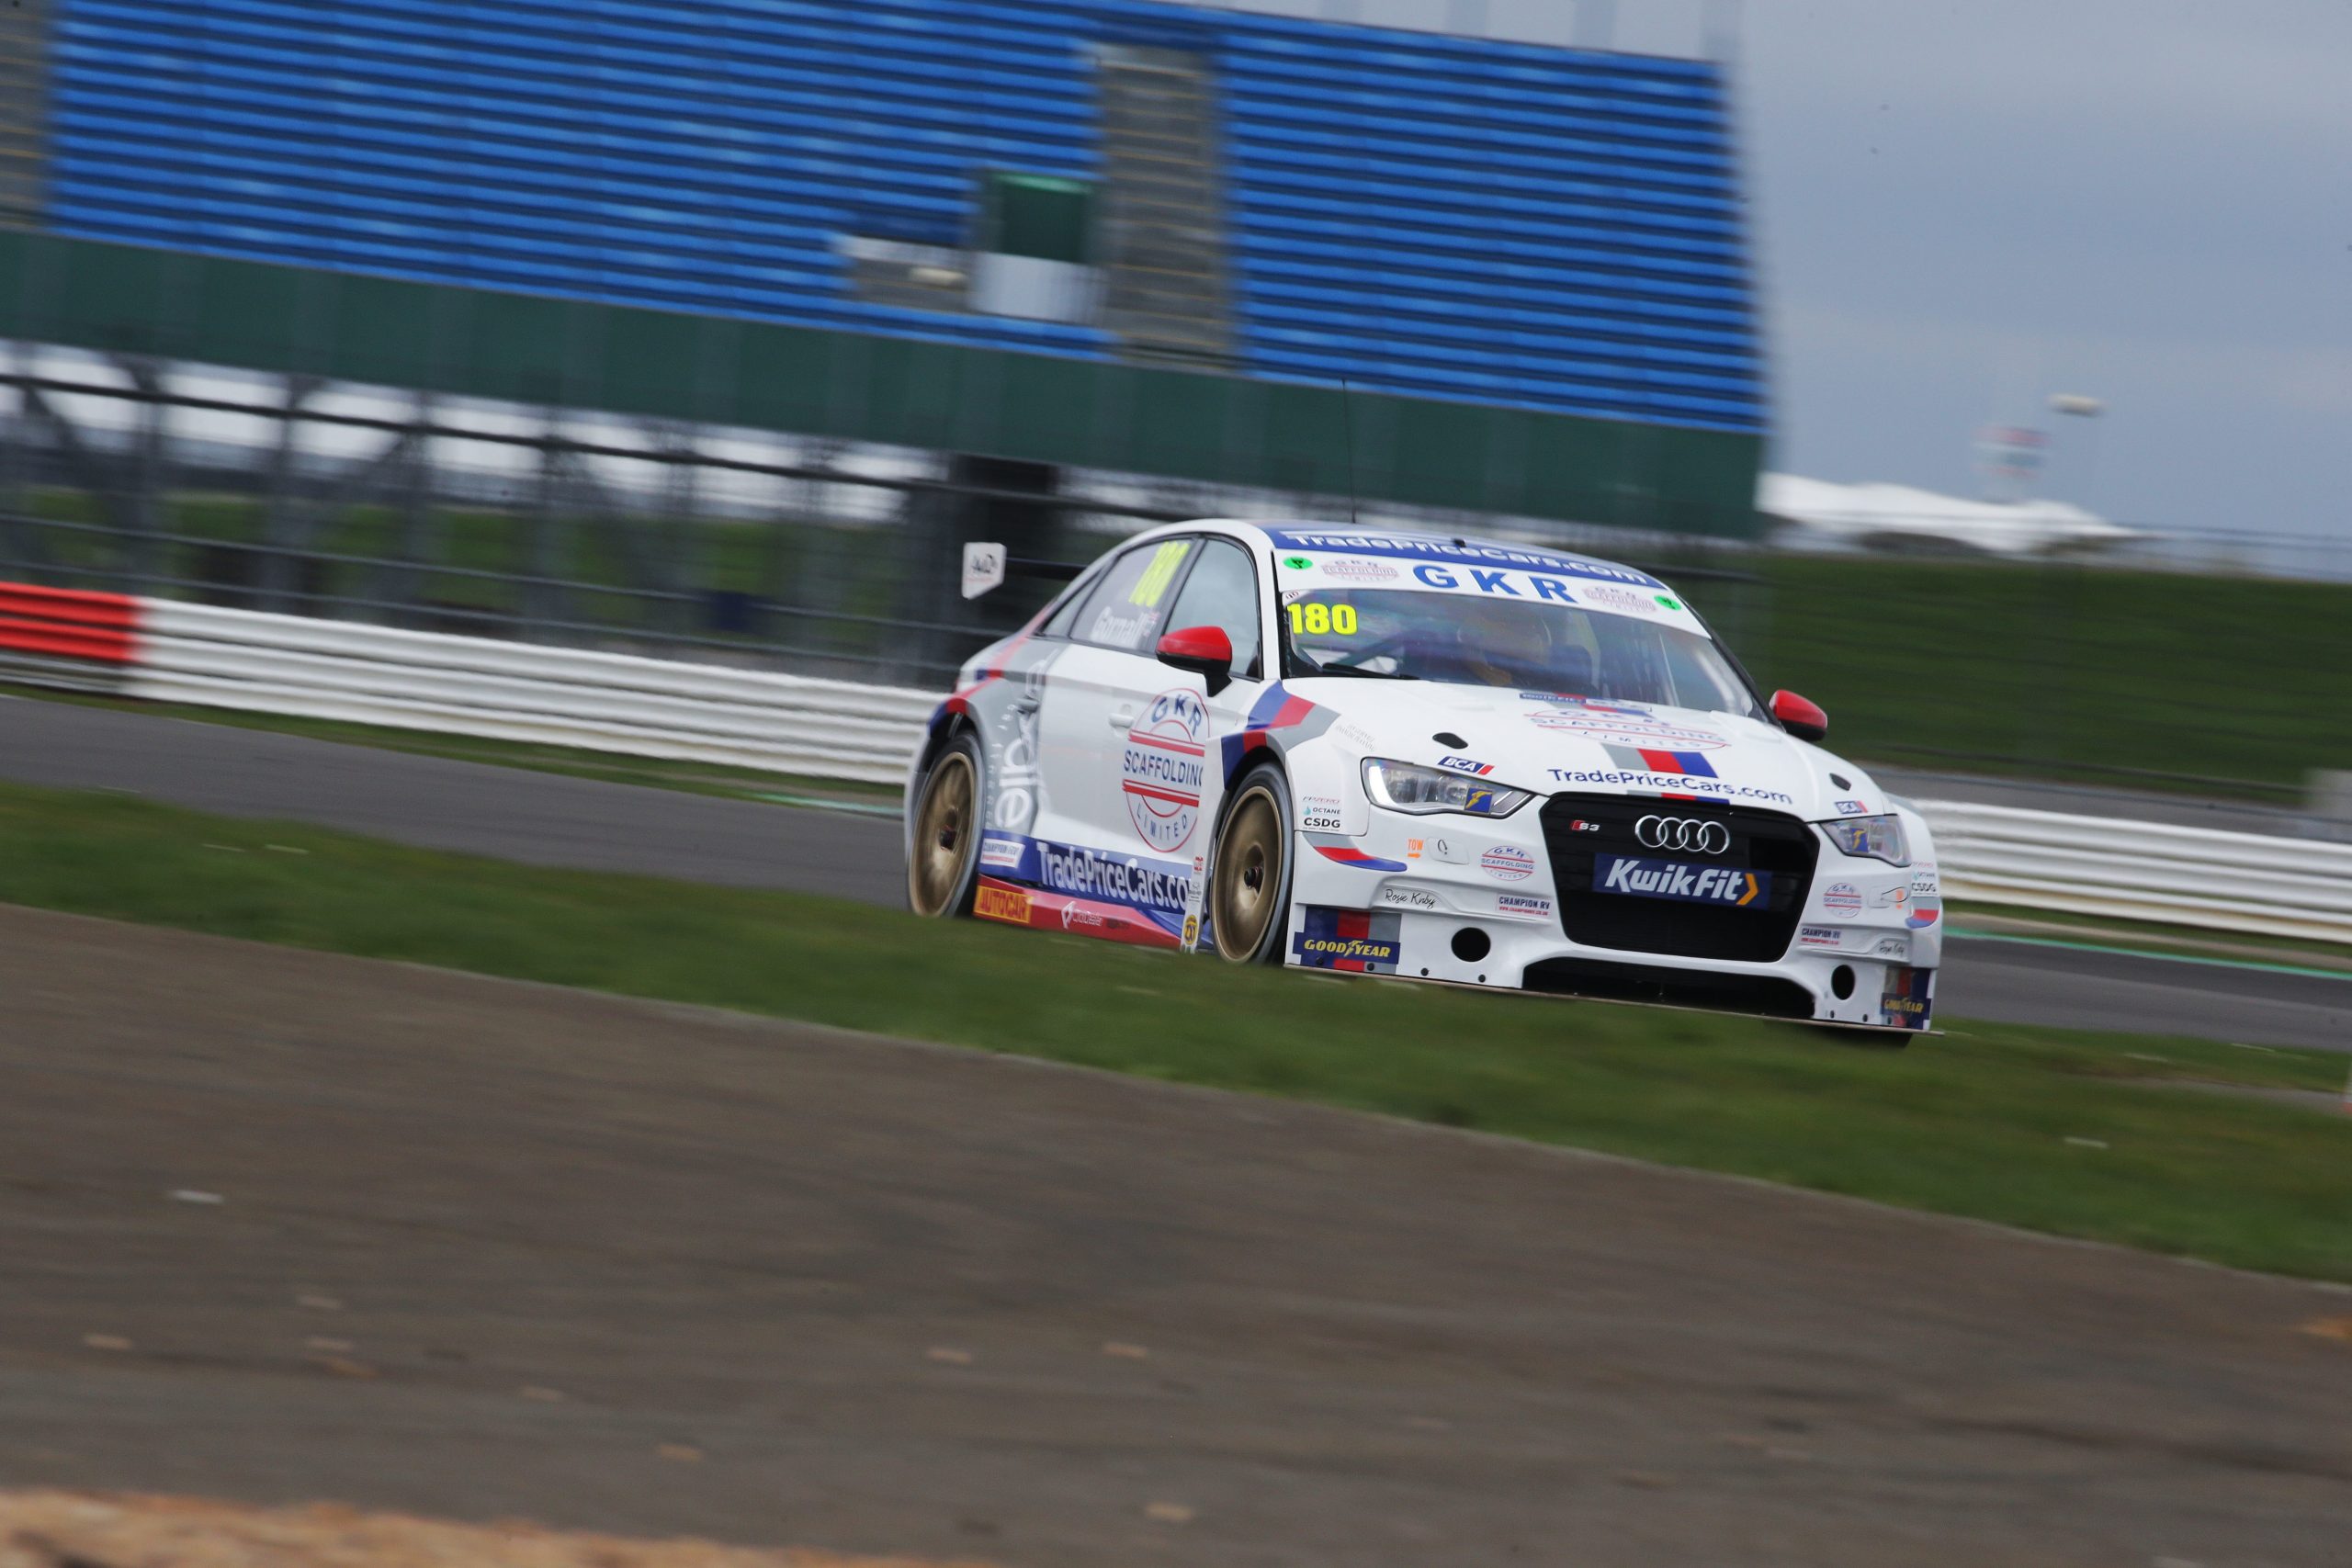 Promising pace for GKR TradePriceCars.com in Silverstone test